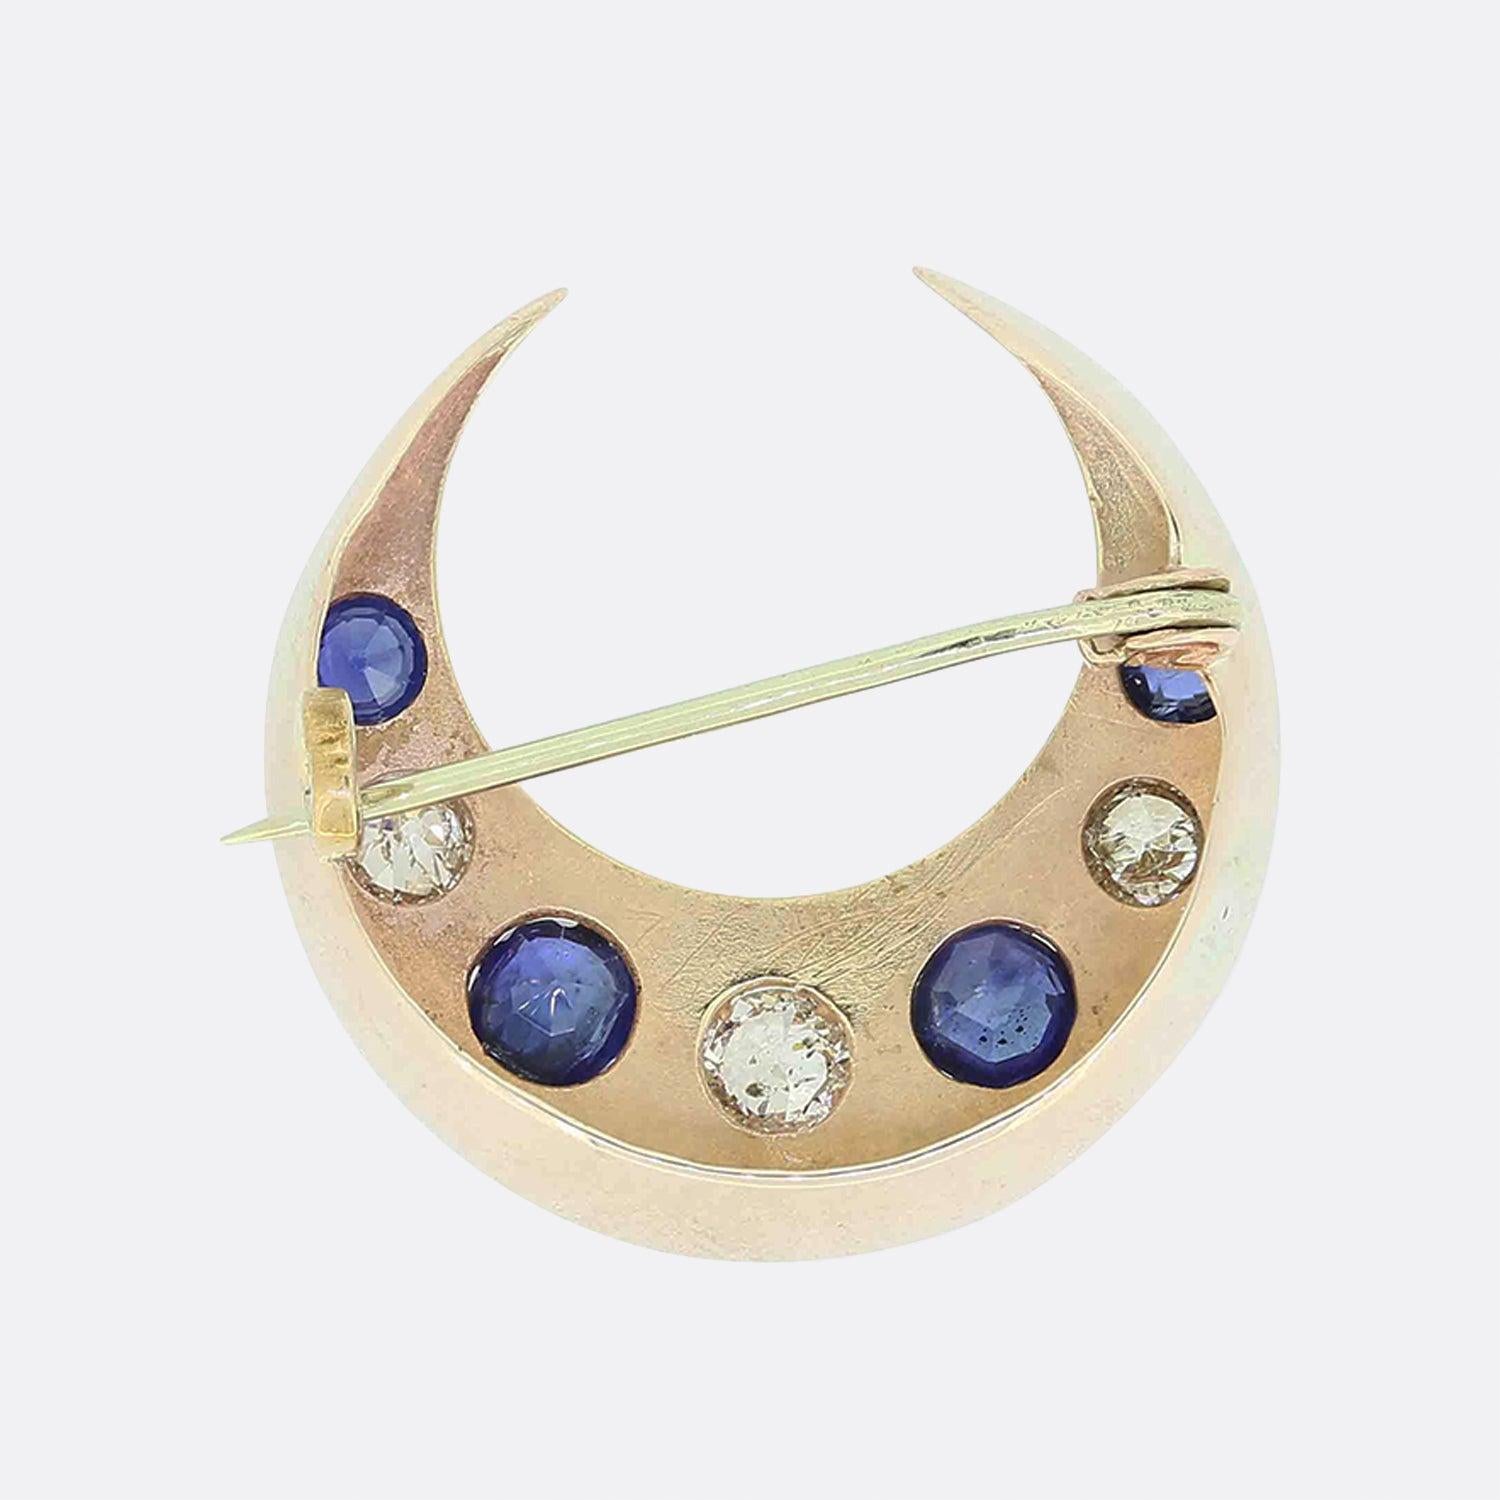 This is a gorgeous sapphire and diamond set crescent moon brooch. It is crafted in 9ct yellow gold, featuring a single row of claw set old cut diamonds and natural blue sapphires. The brooch also features a secure pin and c clasp for added security